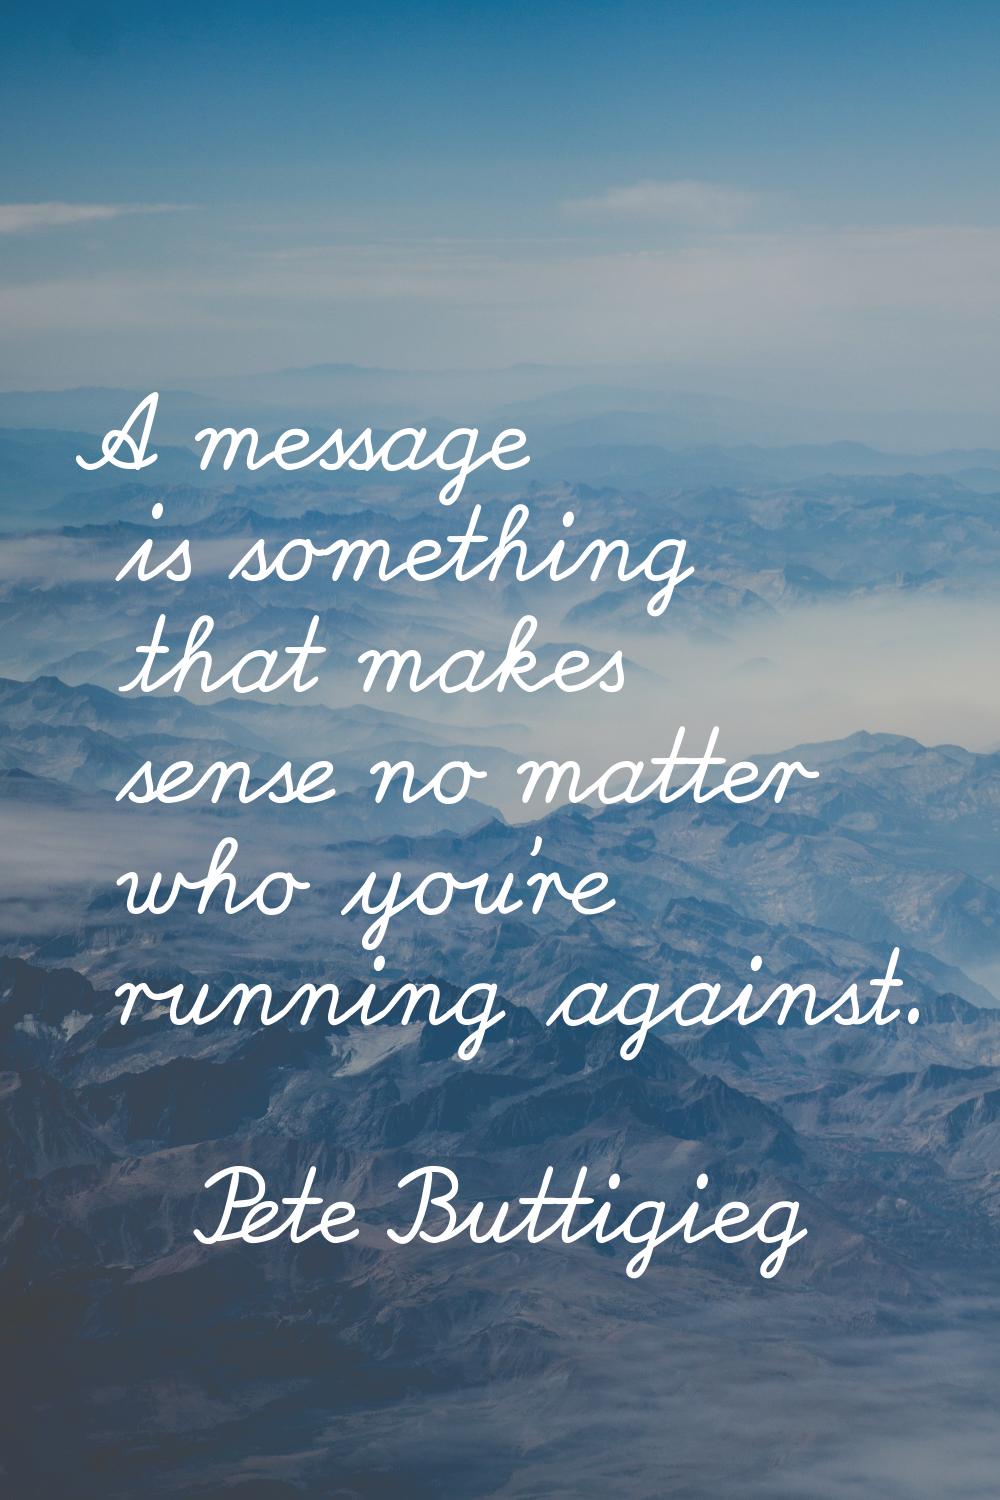 A message is something that makes sense no matter who you're running against.